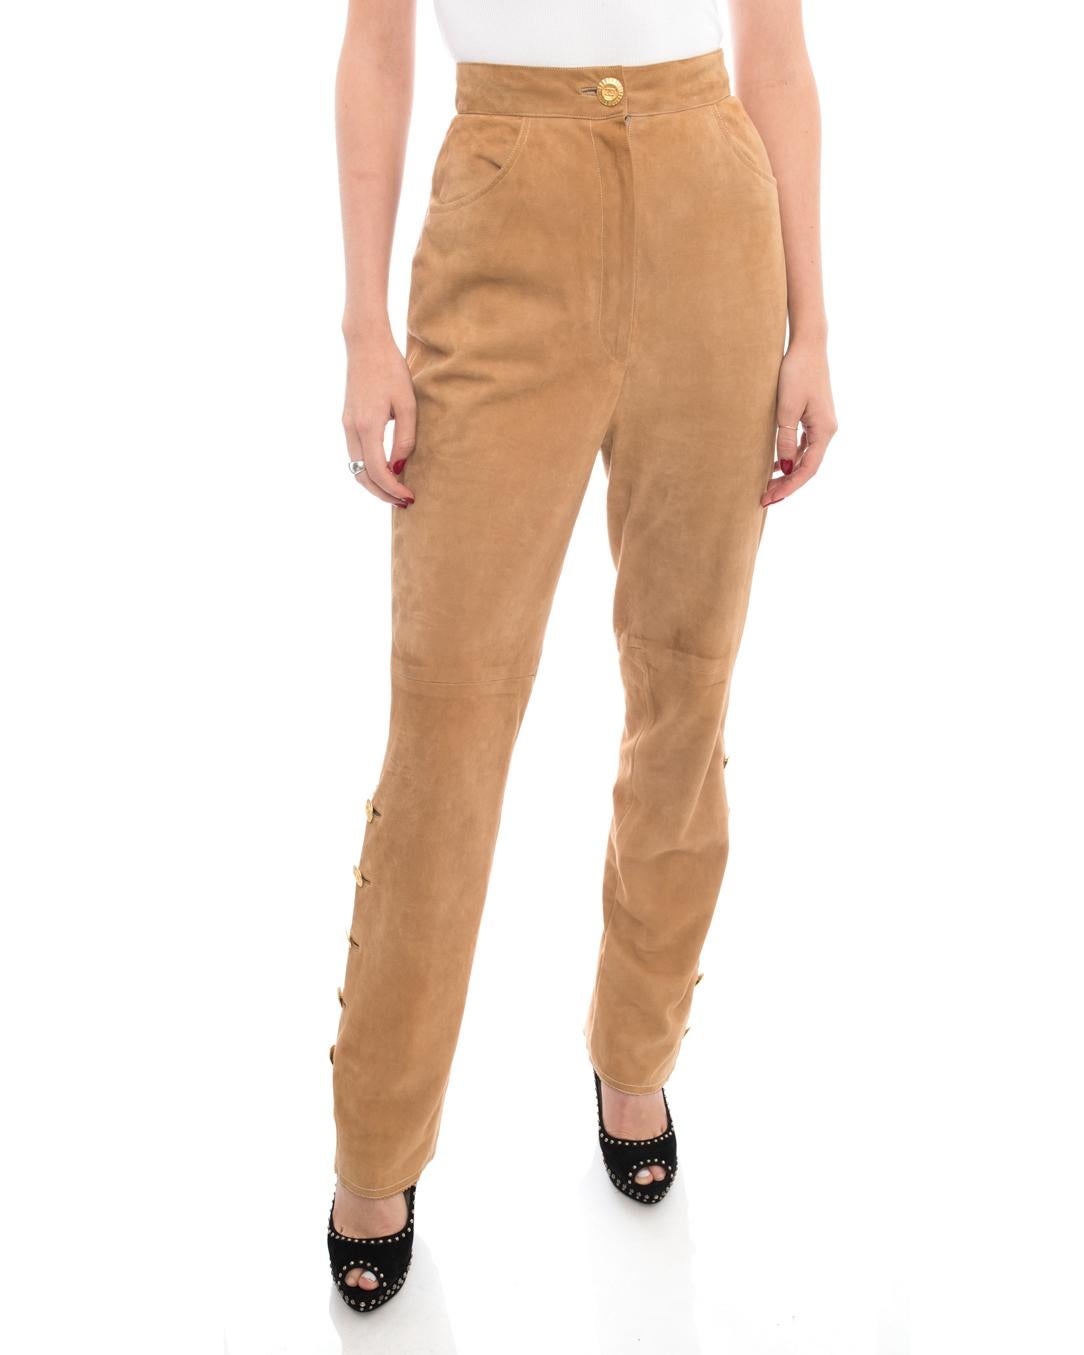 Chanel Vintage 1980’s Tan High Waisted Suede Pants.  Gold anchor buttons decorate the bottom cuffs, extra high waisted design, soft lambskin suede.  Lined with CC logo jacquard fabric. Size tag has been removed but is a USA 6. Measures 27” at high